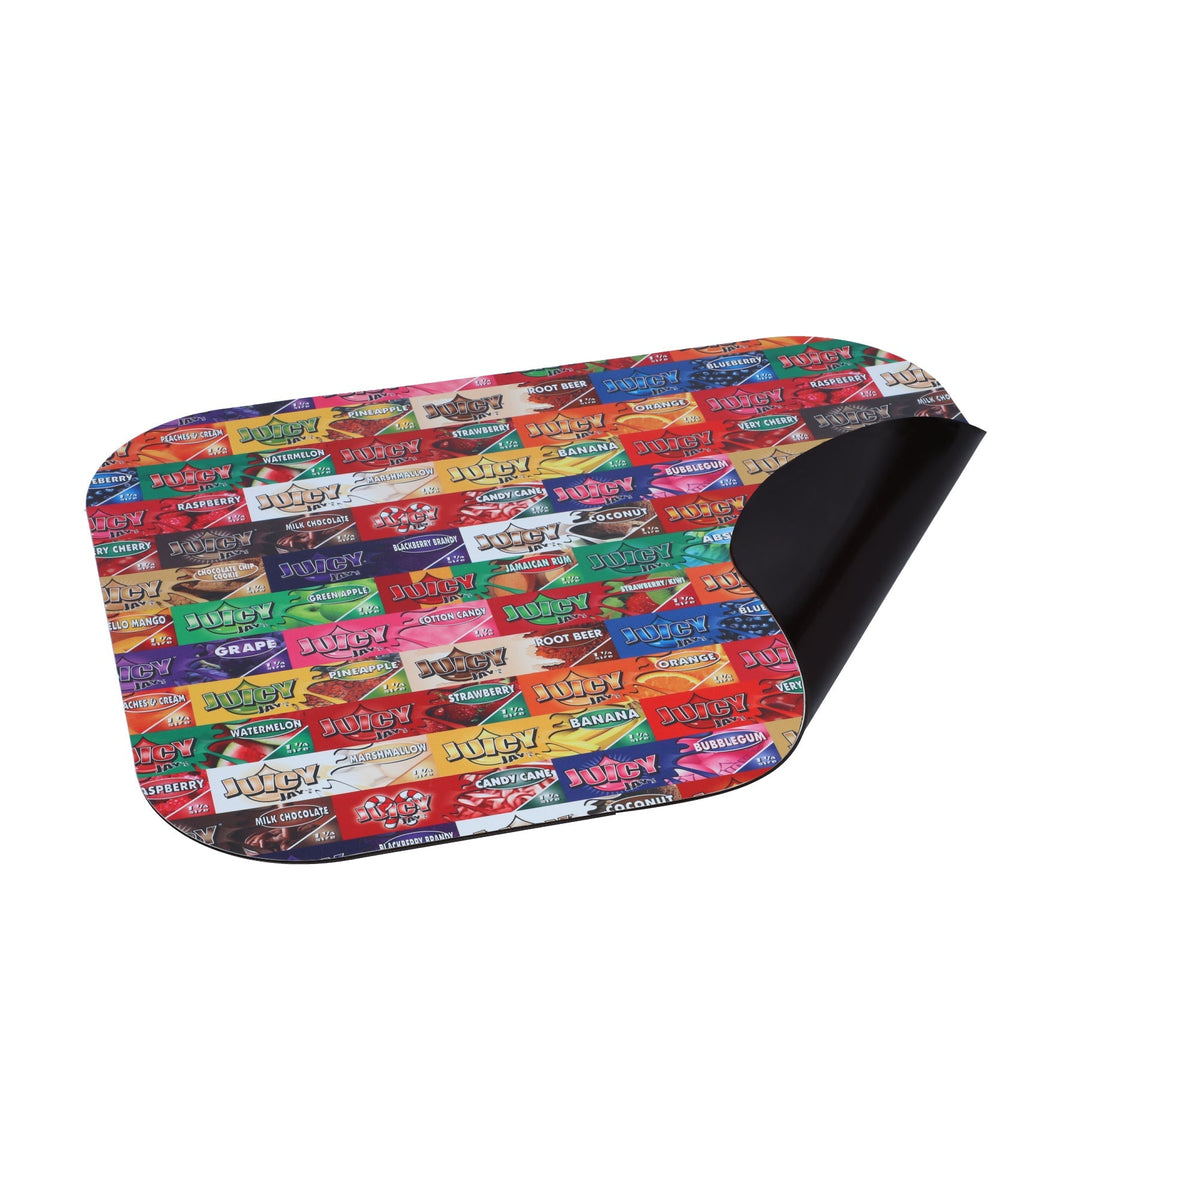 Juicy Jay Rolling Tray Covers Rolling Trays JAY00206-MUSA01 esd-official